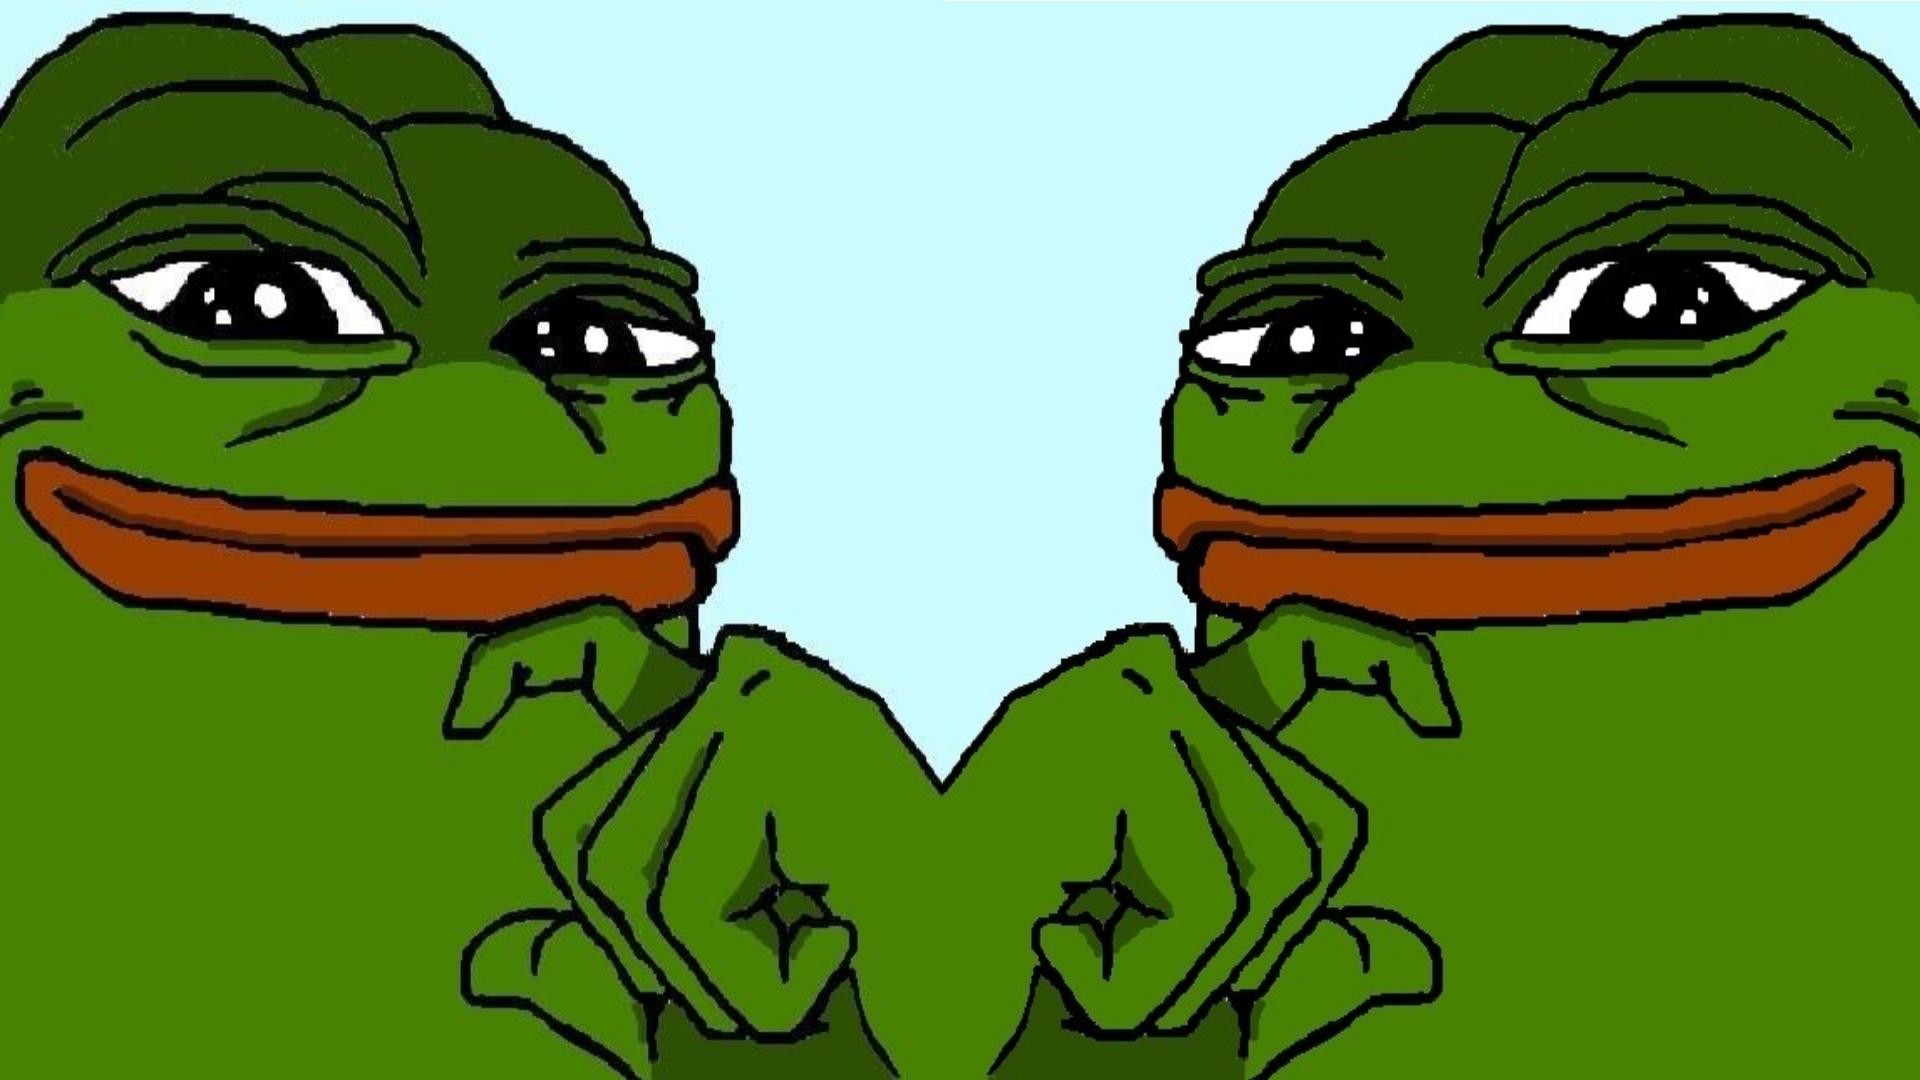  Pepe  the Frog Wallpapers   WallpaperTag